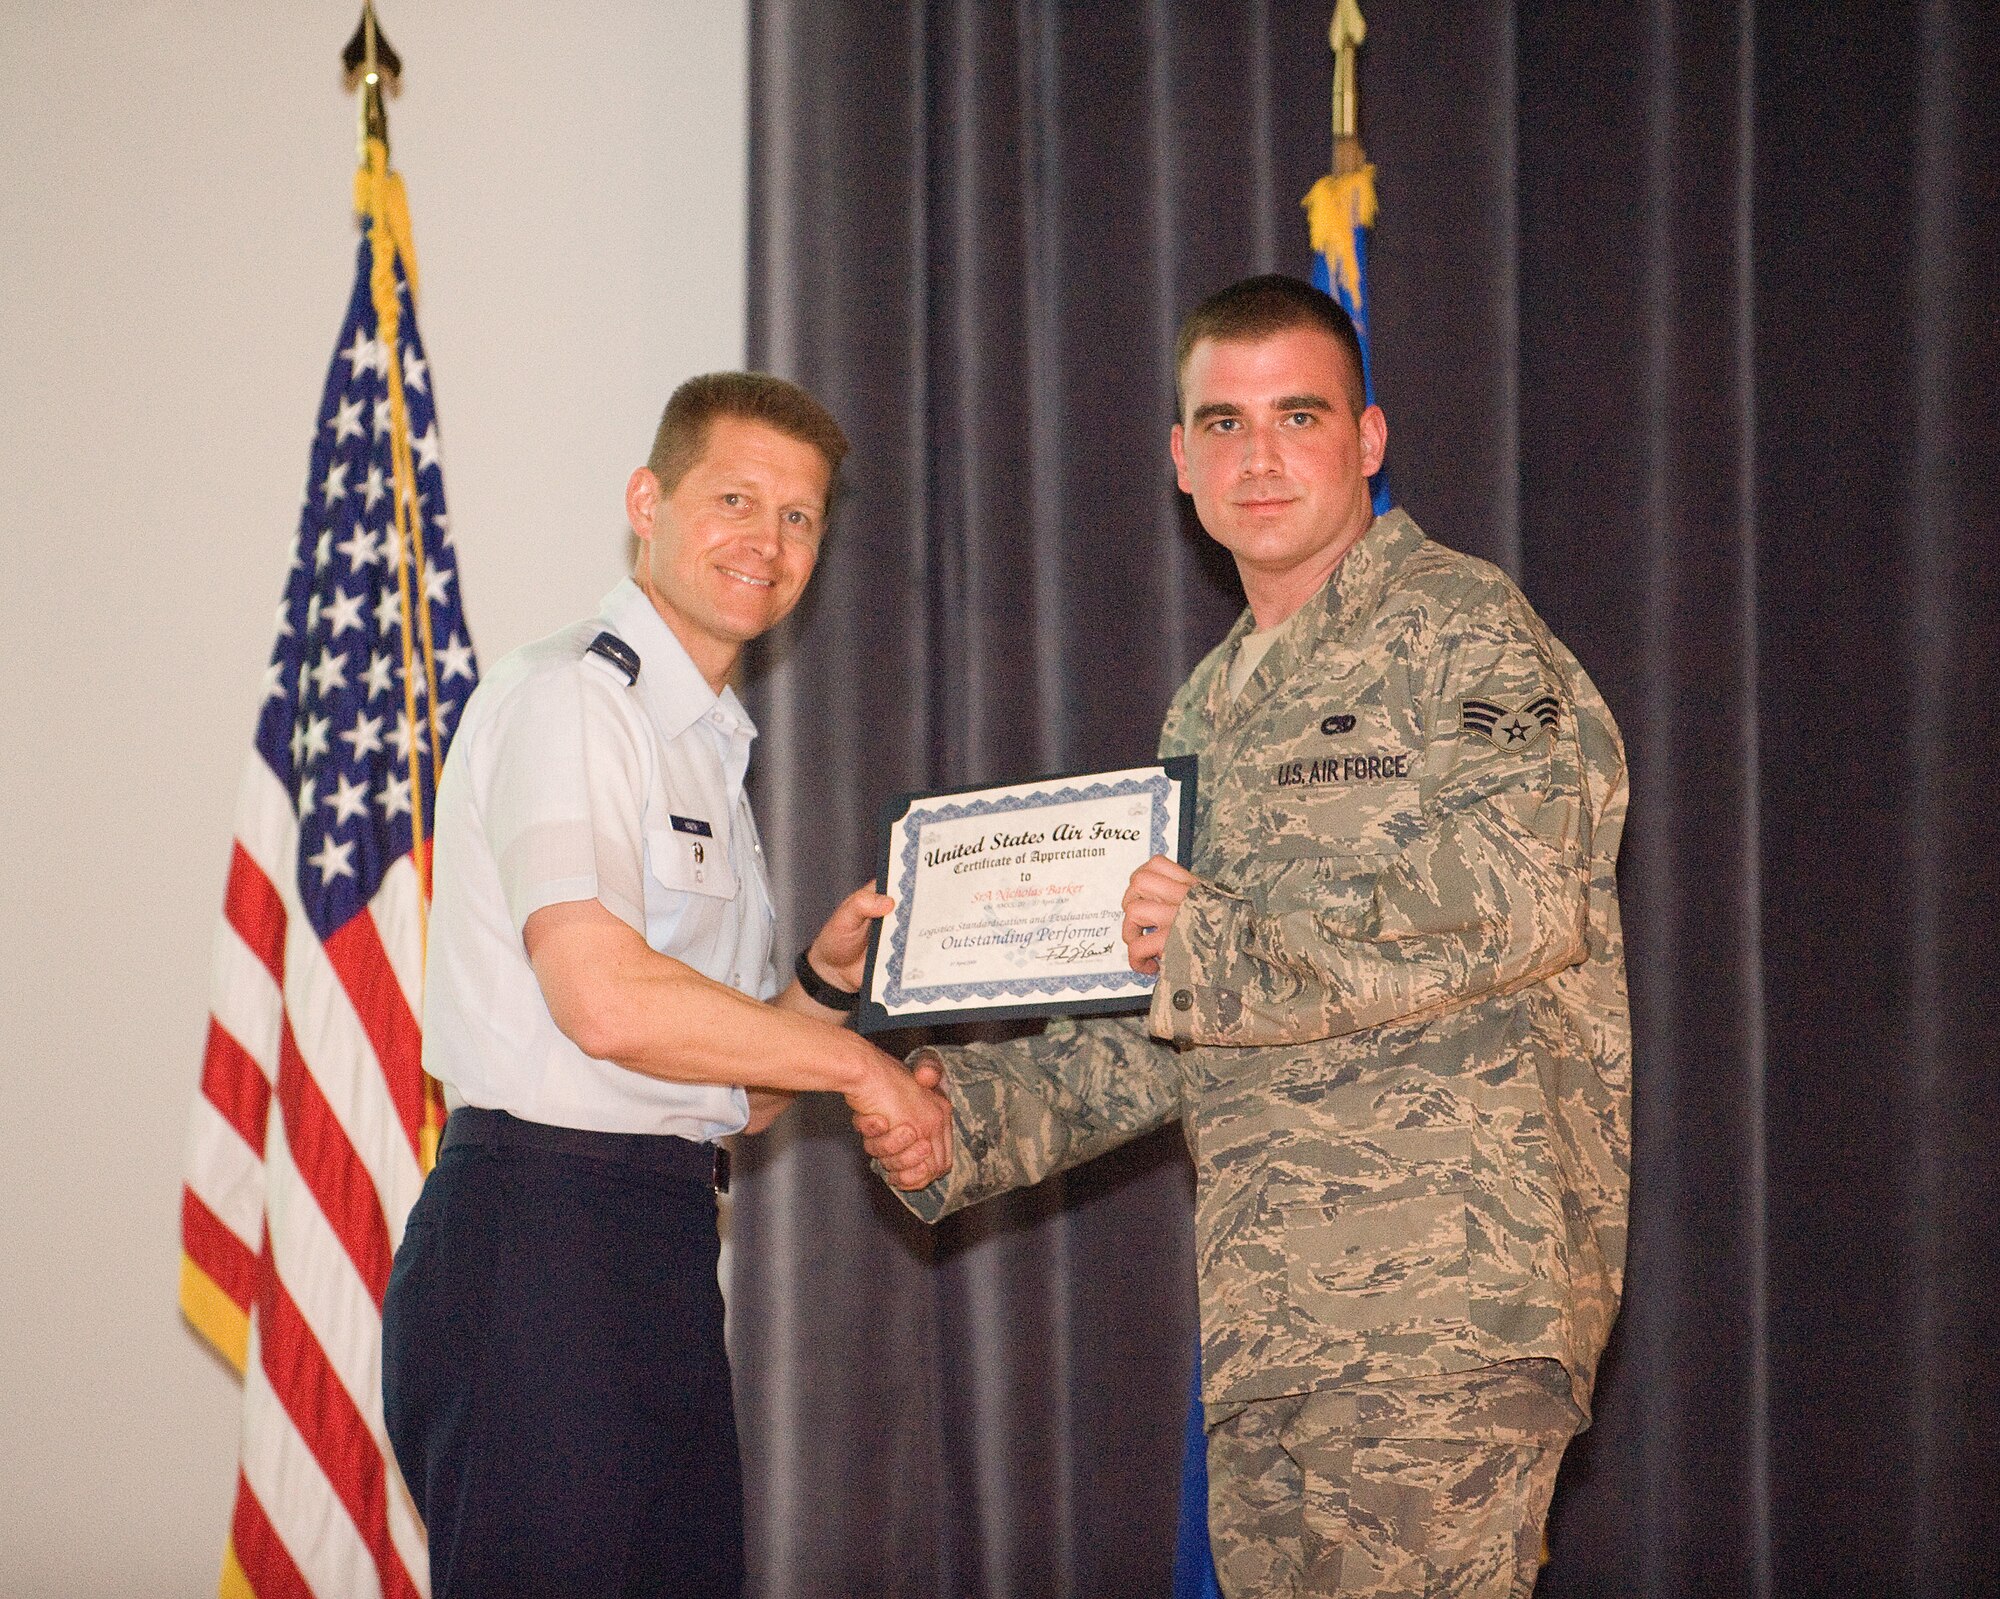 Col. Thomas Kauth, Logistics Assessment Branch chief, presents Senior Airman Nicholas Barker, 436th Aircraft Maintenance Squadron crew chief, a certificate of appreciation for his excellence during Dover Air Force Base?s Logistics Standardization and Evaluation Program inspection. Less than two months later, Airman Barker shone his excellence again by subduing an irate foreign man on an international commercial flight to Italy. The Airman kept the plane secure until it landed and the man was turned over to Italian authorities. (U.S. Air Force Photo/Tom Randle)